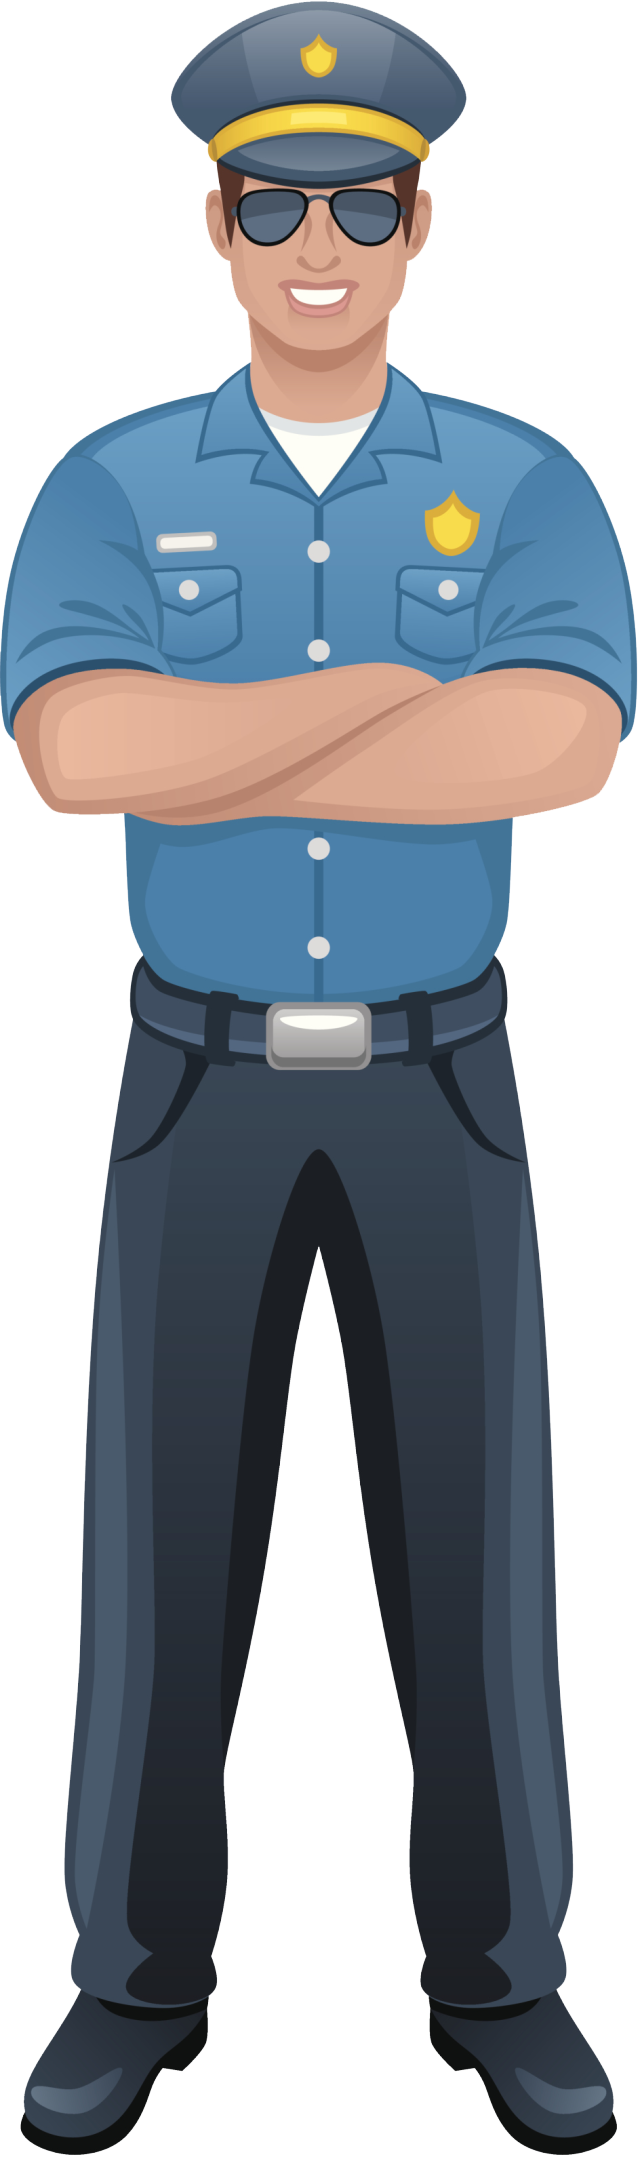 Clip art officer srp. Clipart woman police